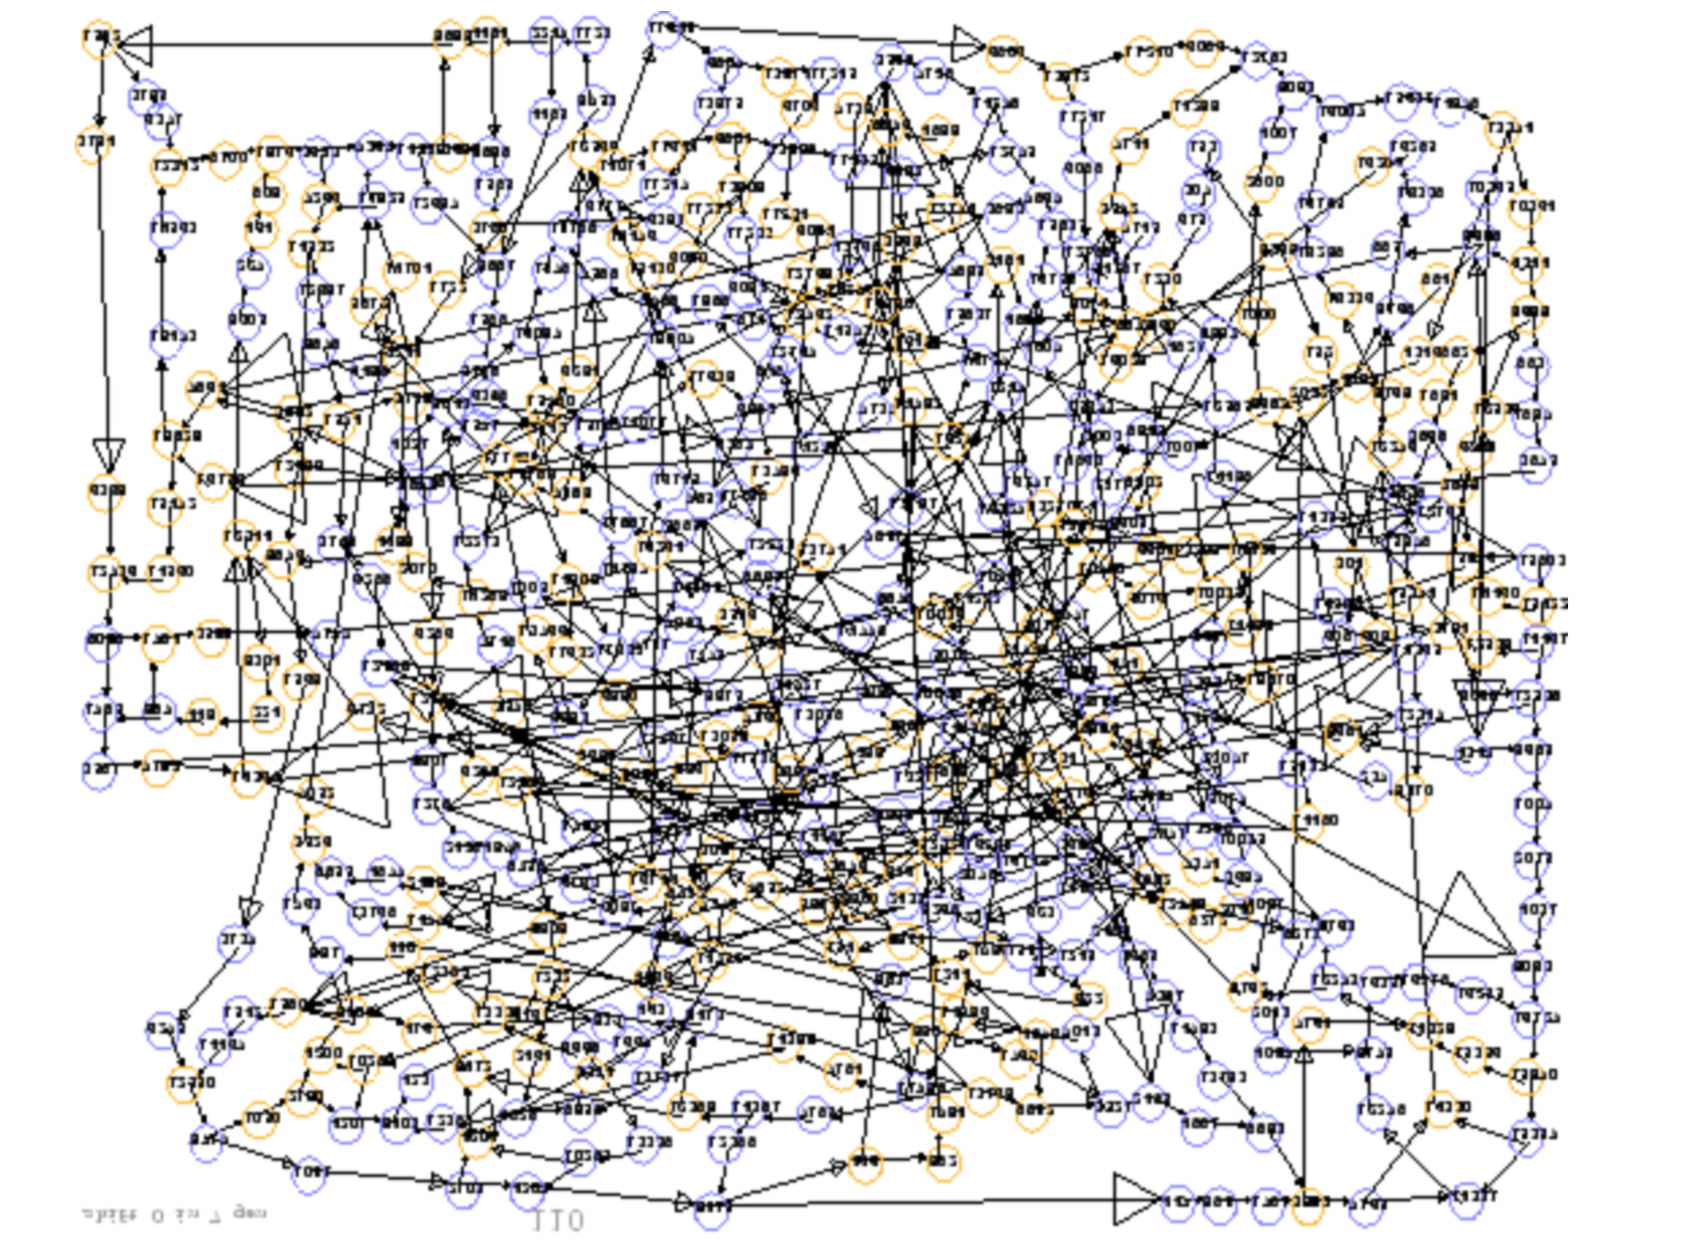 A graph showing maybe 500 nodes connected with messy lines, it is intentionally impossible to read and a mess to highlight the scope of the problem.